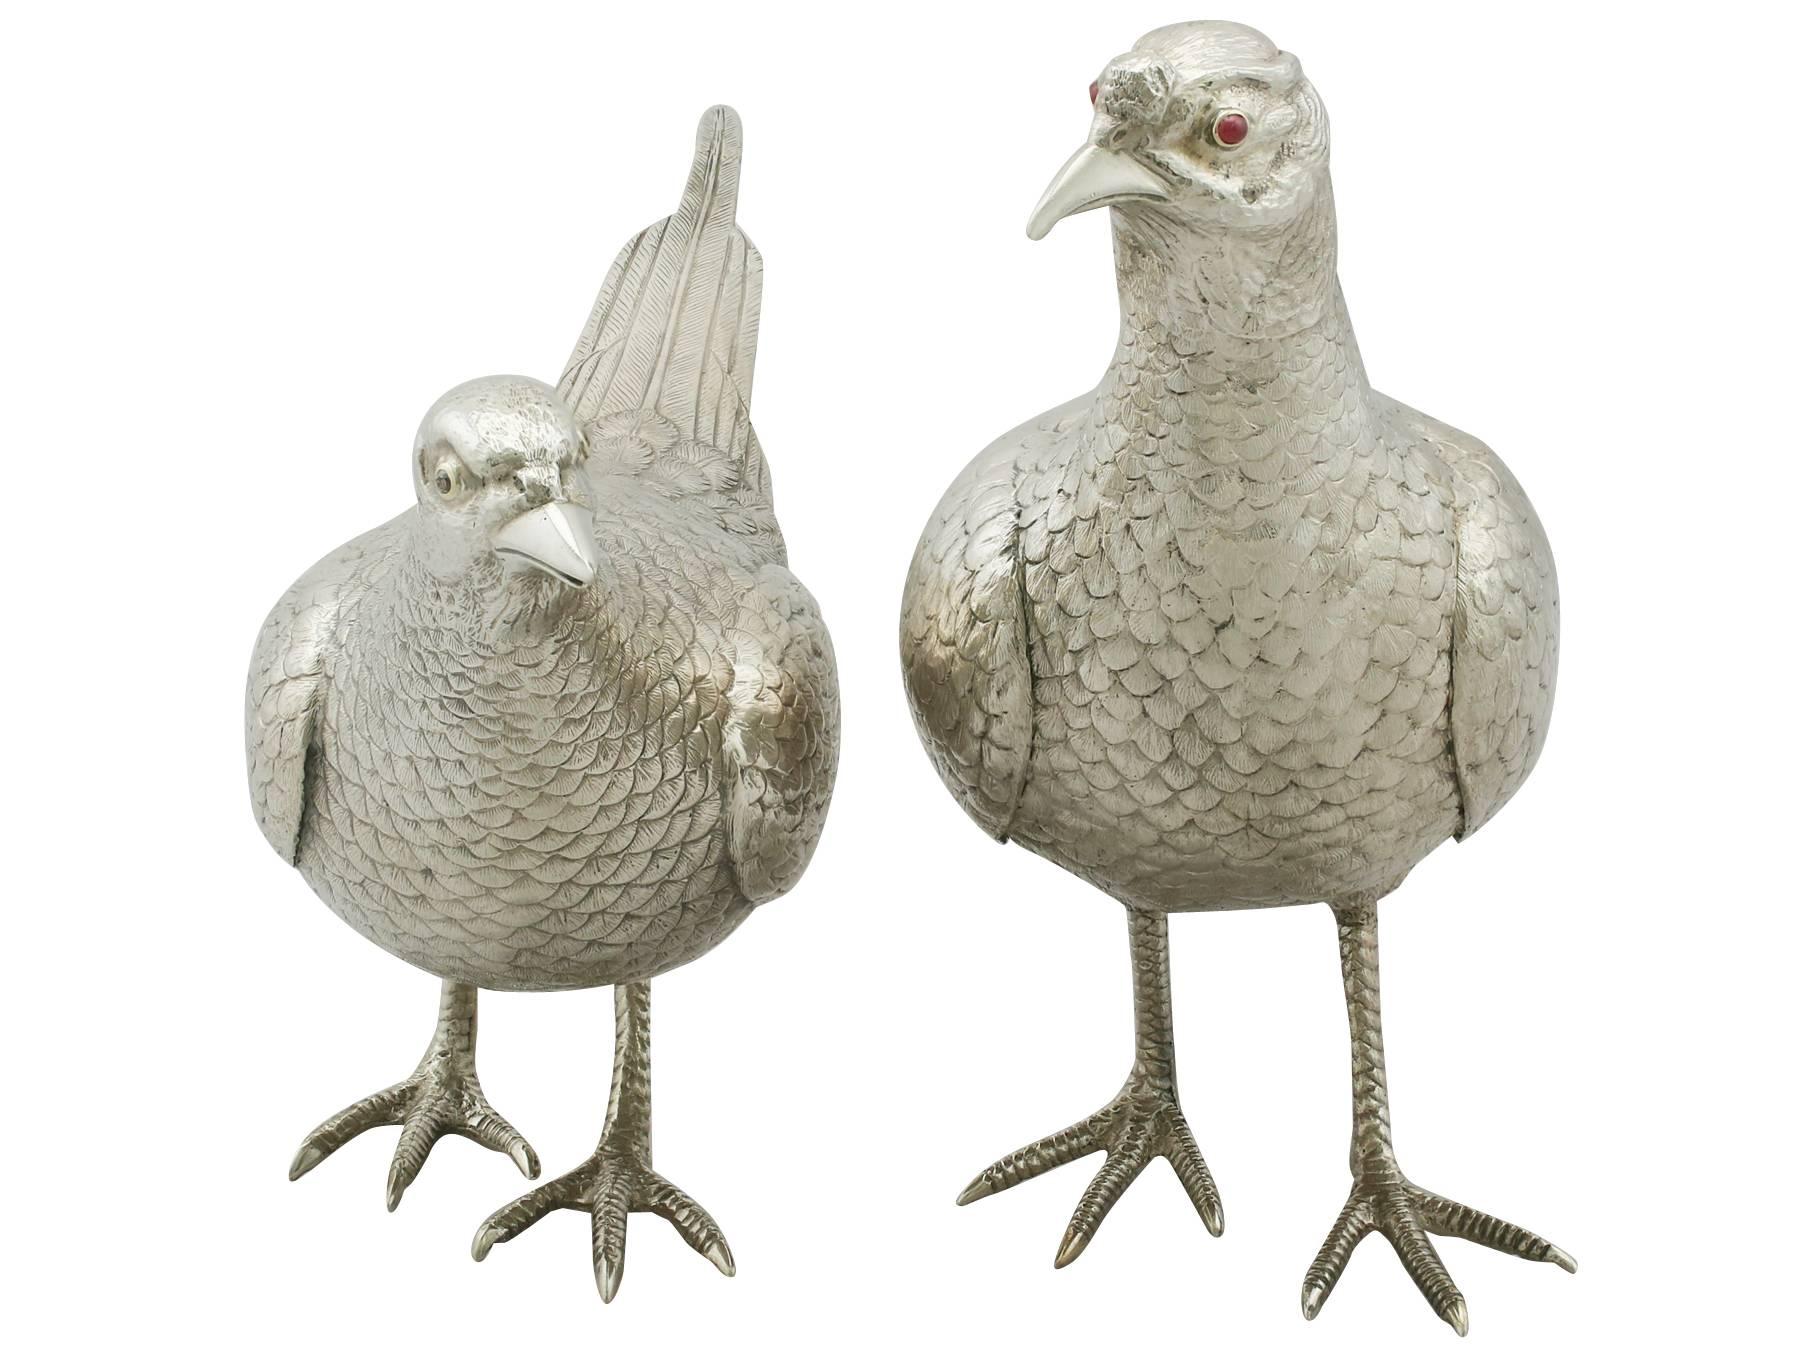 An exceptional, fine and impressive pair of vintage English sterling silver table pheasants; part of our ornamental silverware collection

These exceptional vintage cast sterling silver table ornaments have been realistically modelled in the form